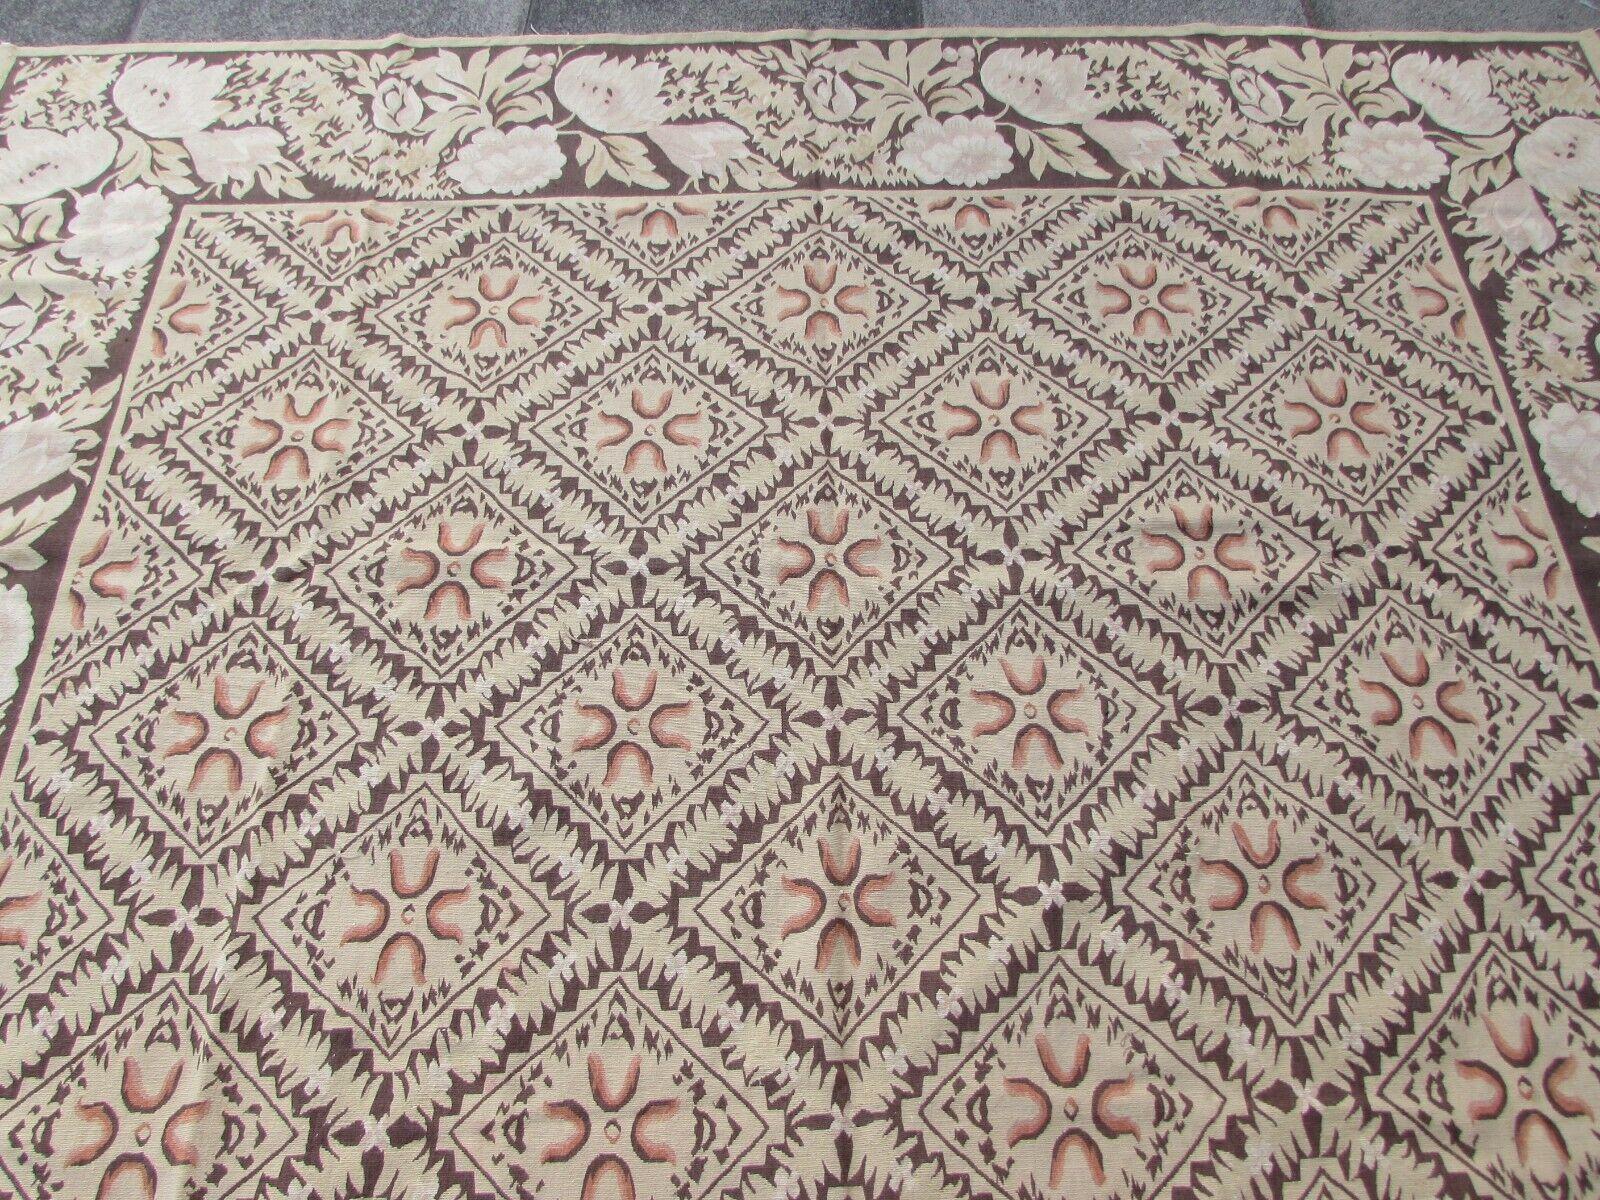 Hand-Knotted Handmade Vintage French Aubusson Flatweave Rug 7.9' x 9.8', 1970s, 1Q41 For Sale